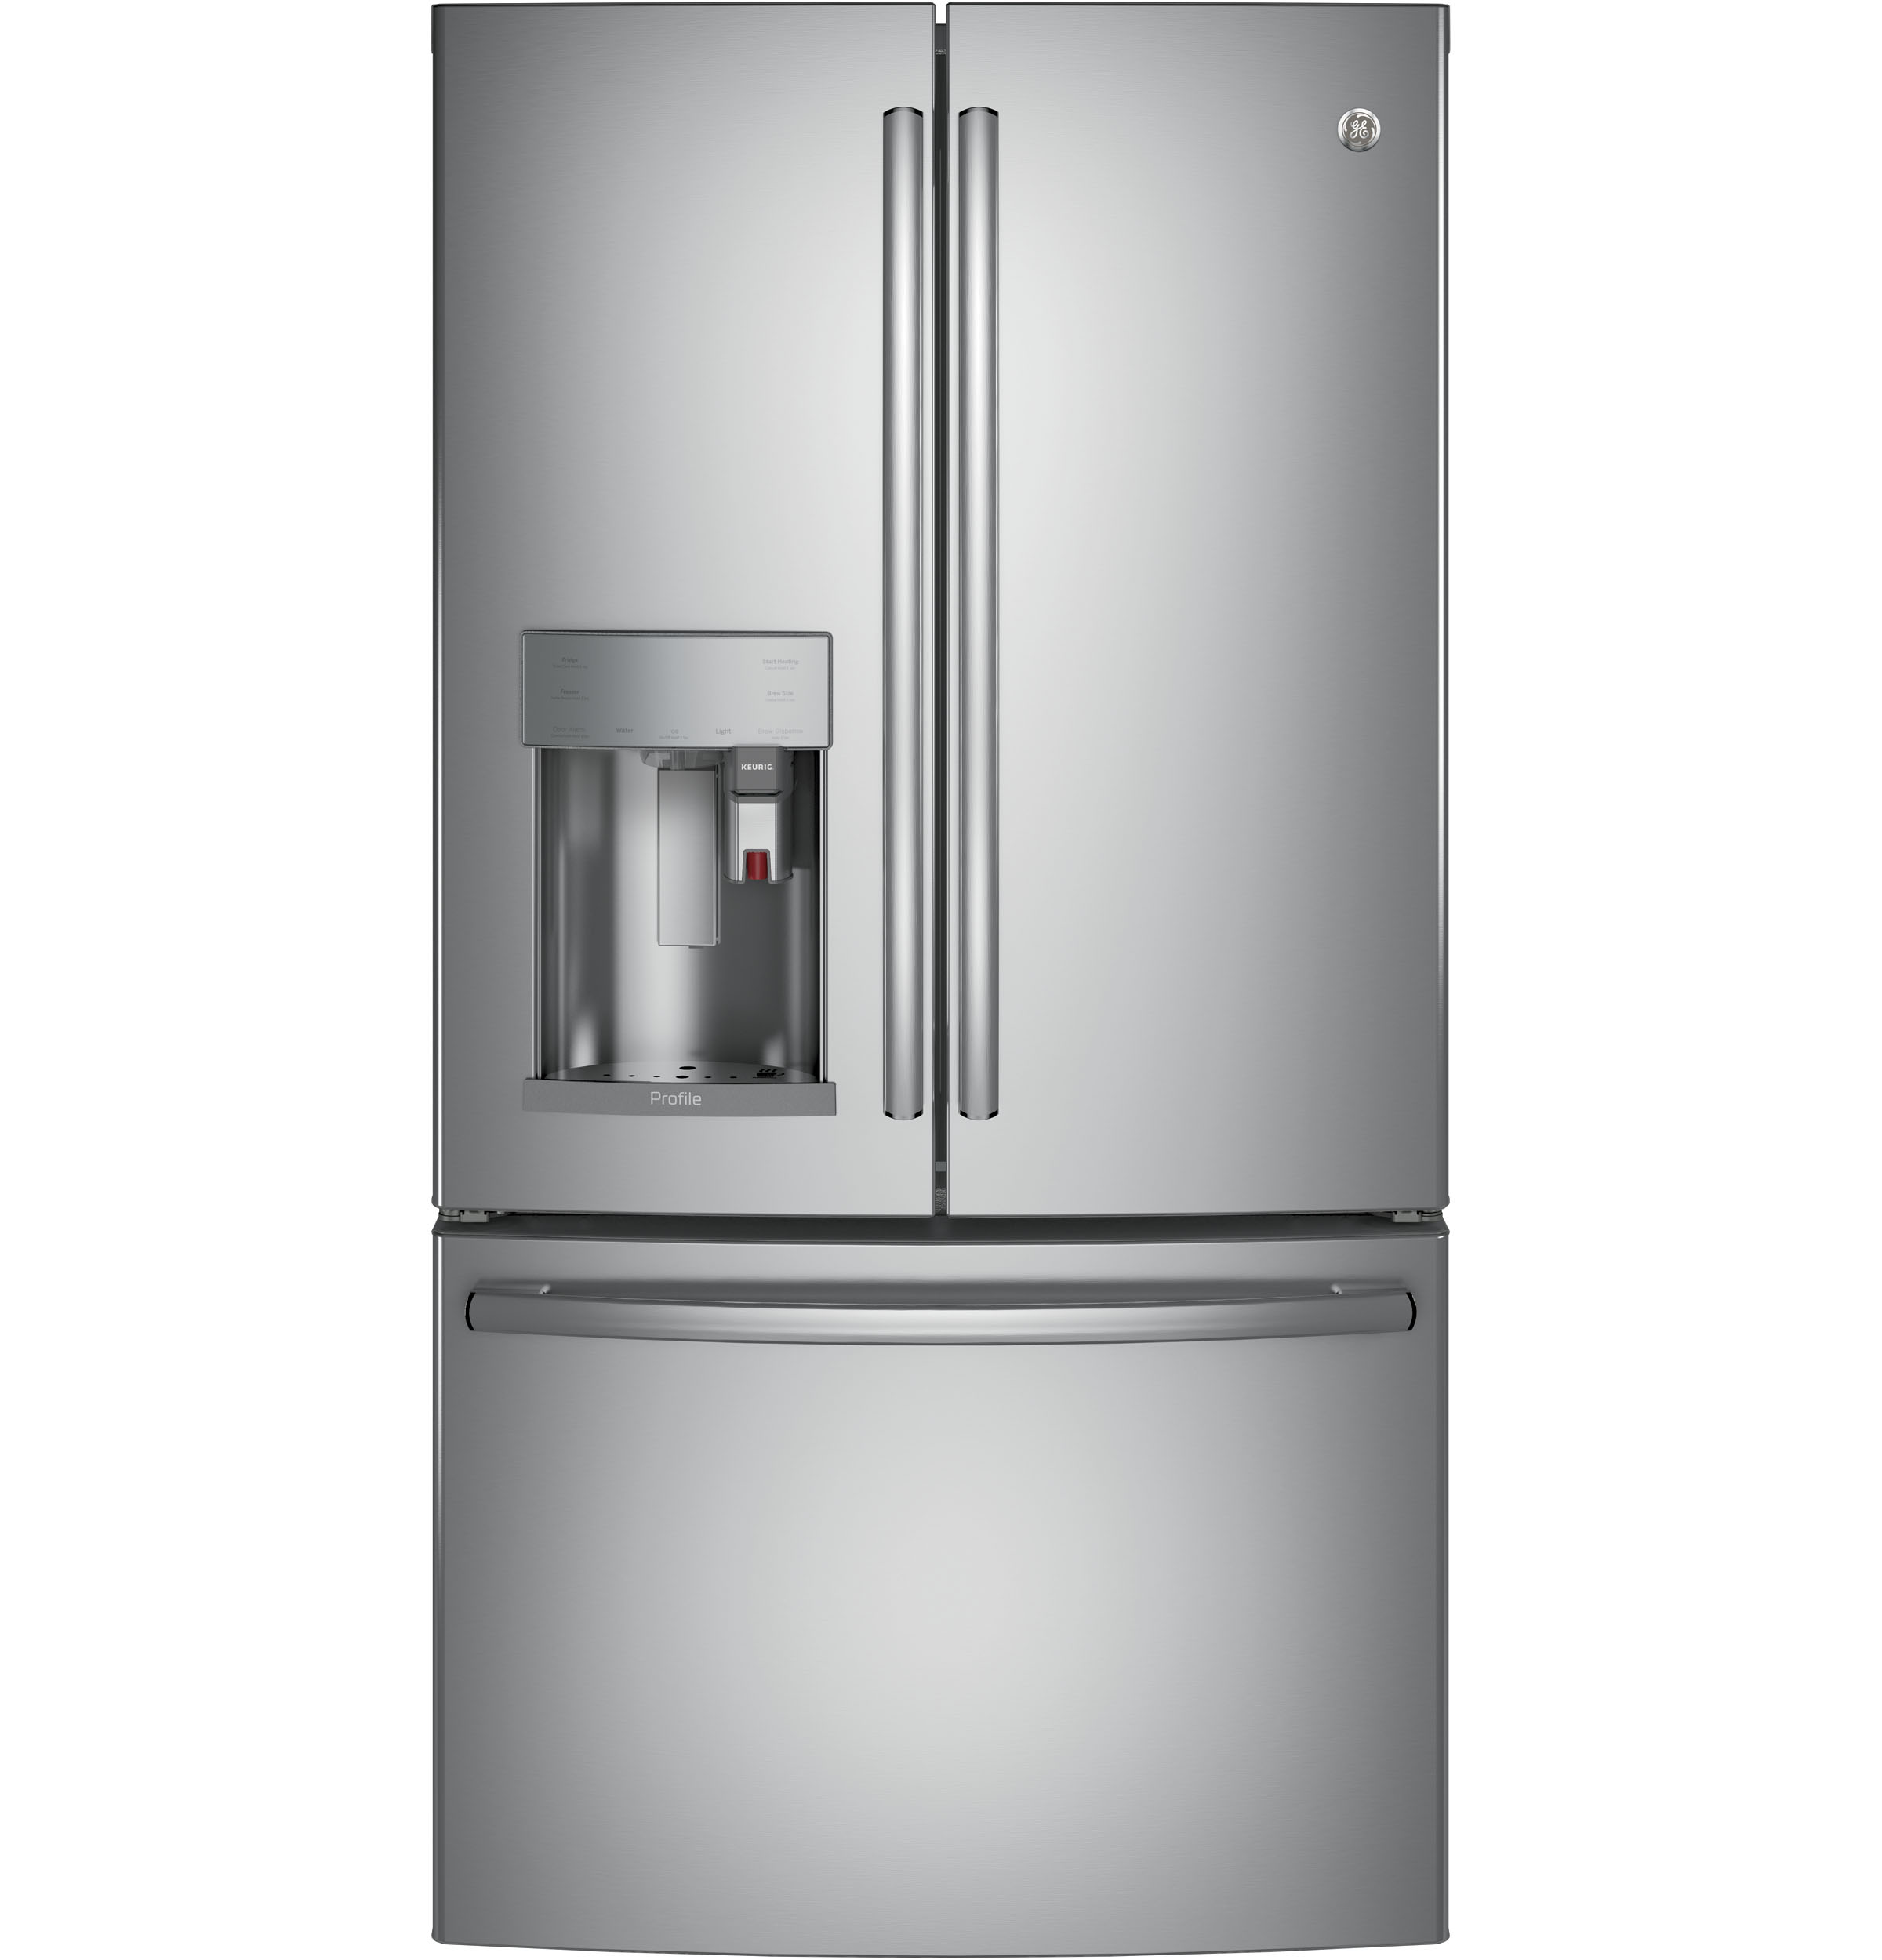 GE Profile™ Series ENERGY STAR® 22.1 Cu. Ft. Smart Counter-Depth French-Door Refrigerator with Keurig® K-Cup® Brewing System